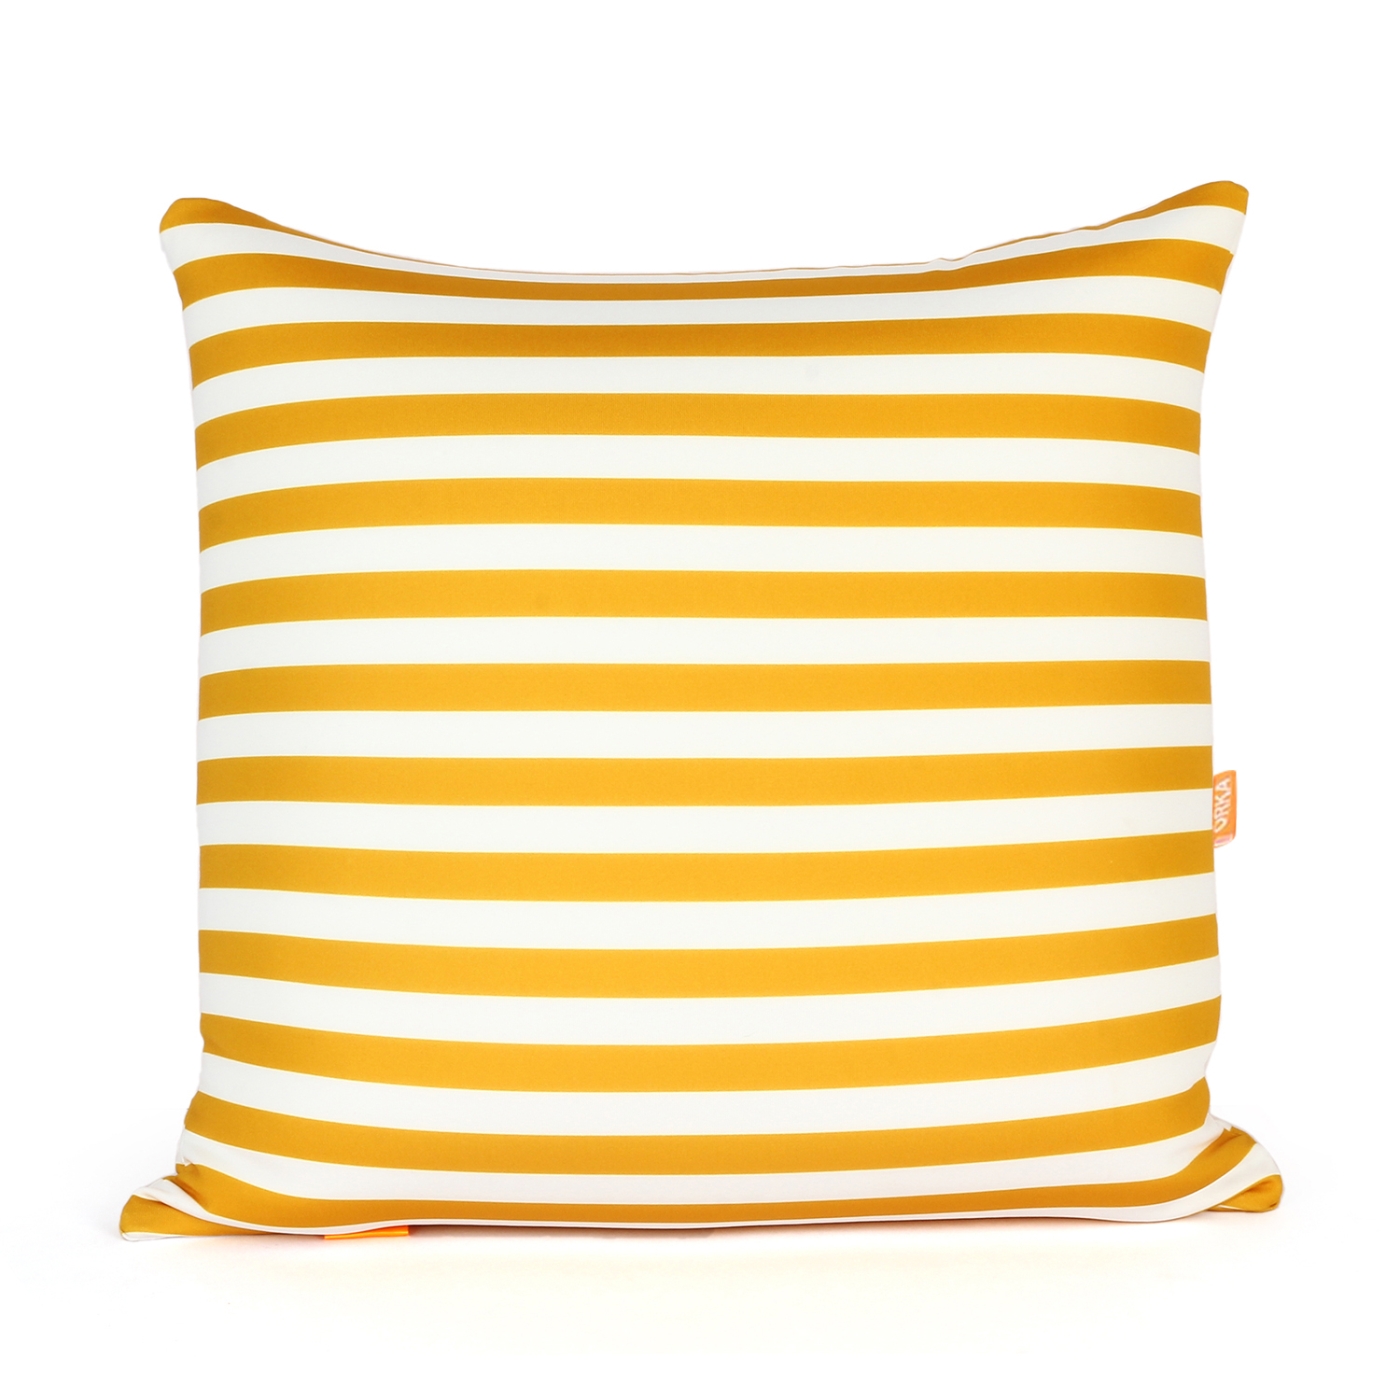 ORKA Digital Printed Spandex Filled With Microbeads Square Cushion 14 X 14  Inch - Yellow, White  